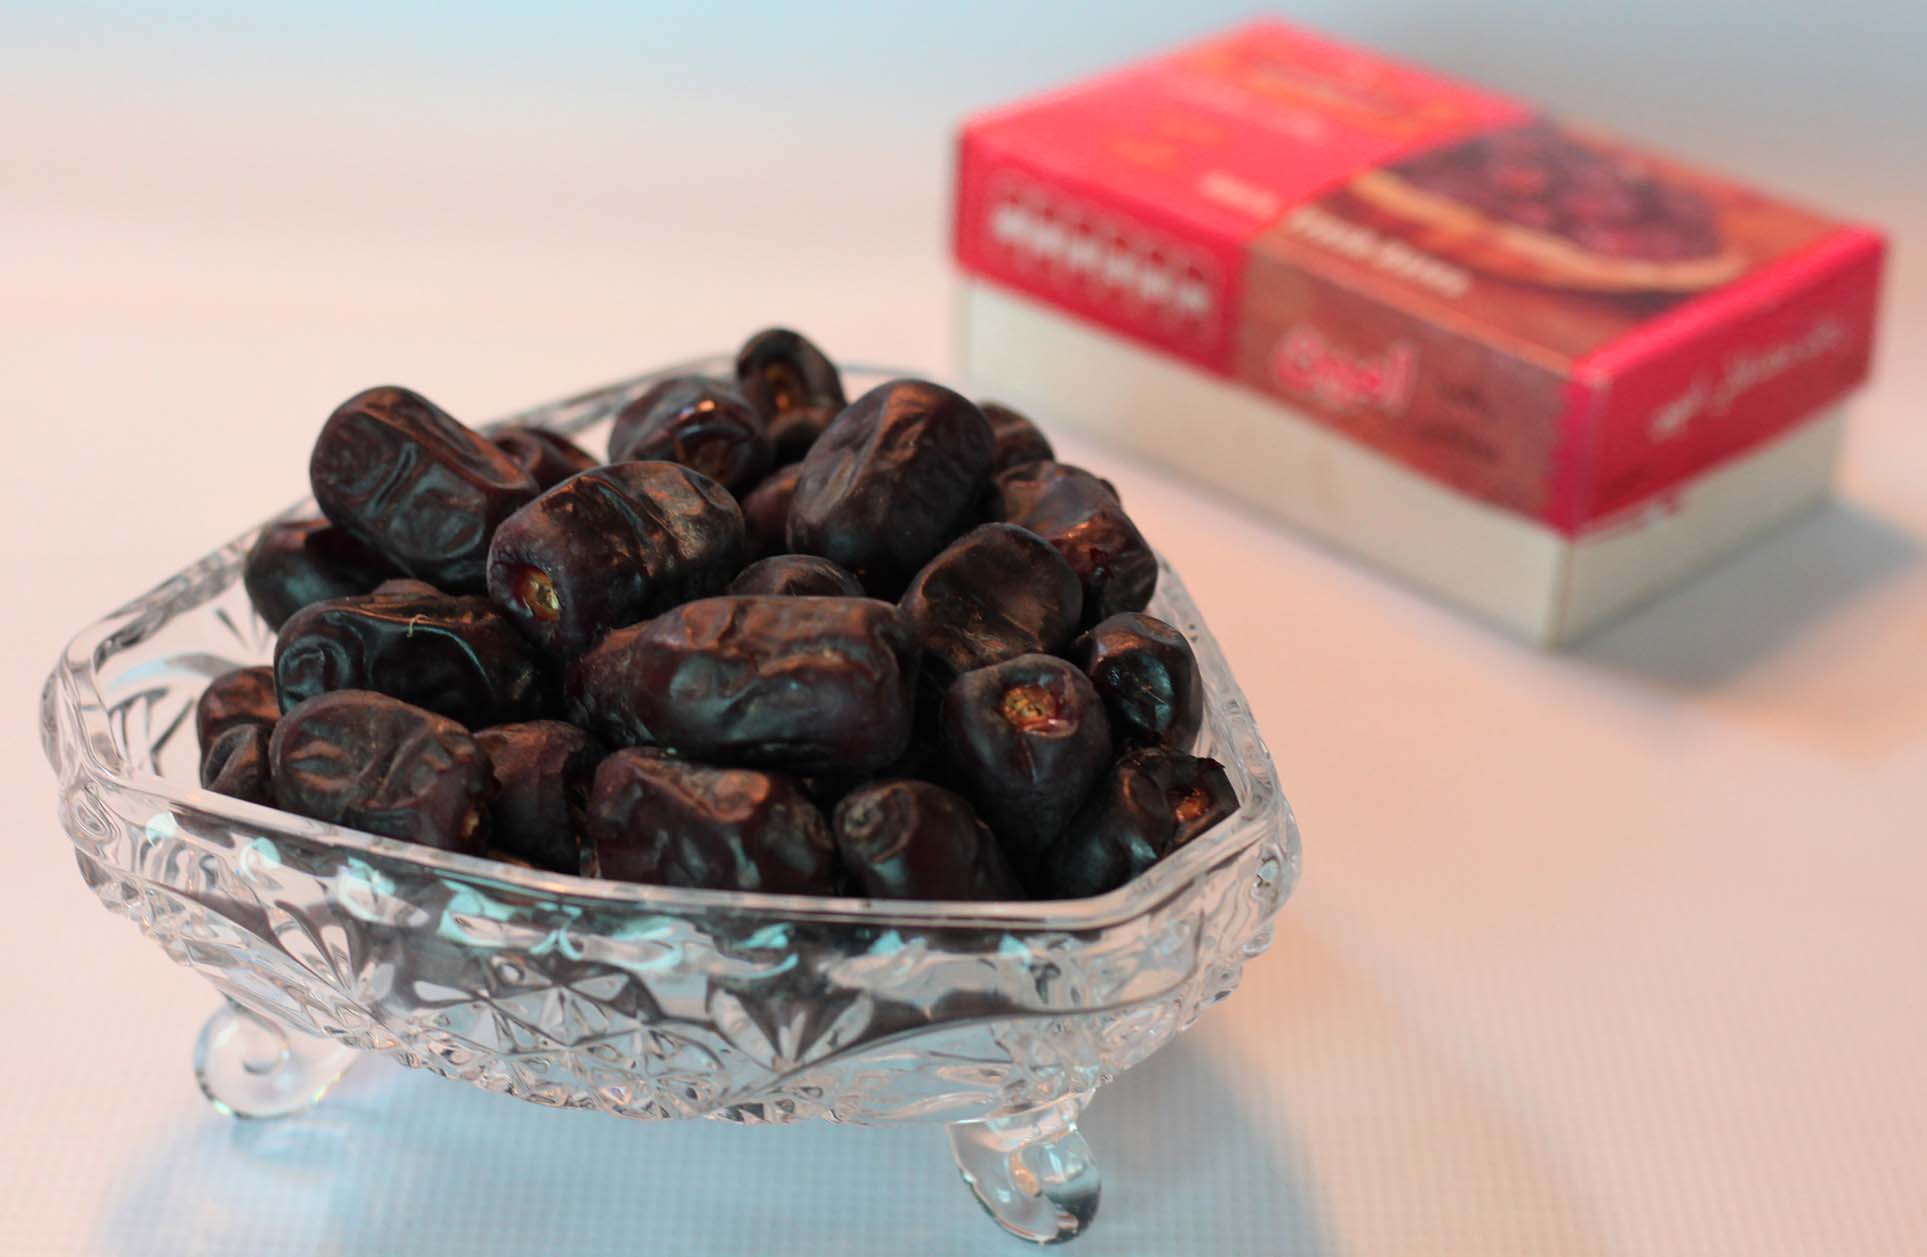 Iranian Dates Buy iranian dates in tehran from Dtt Company Find here